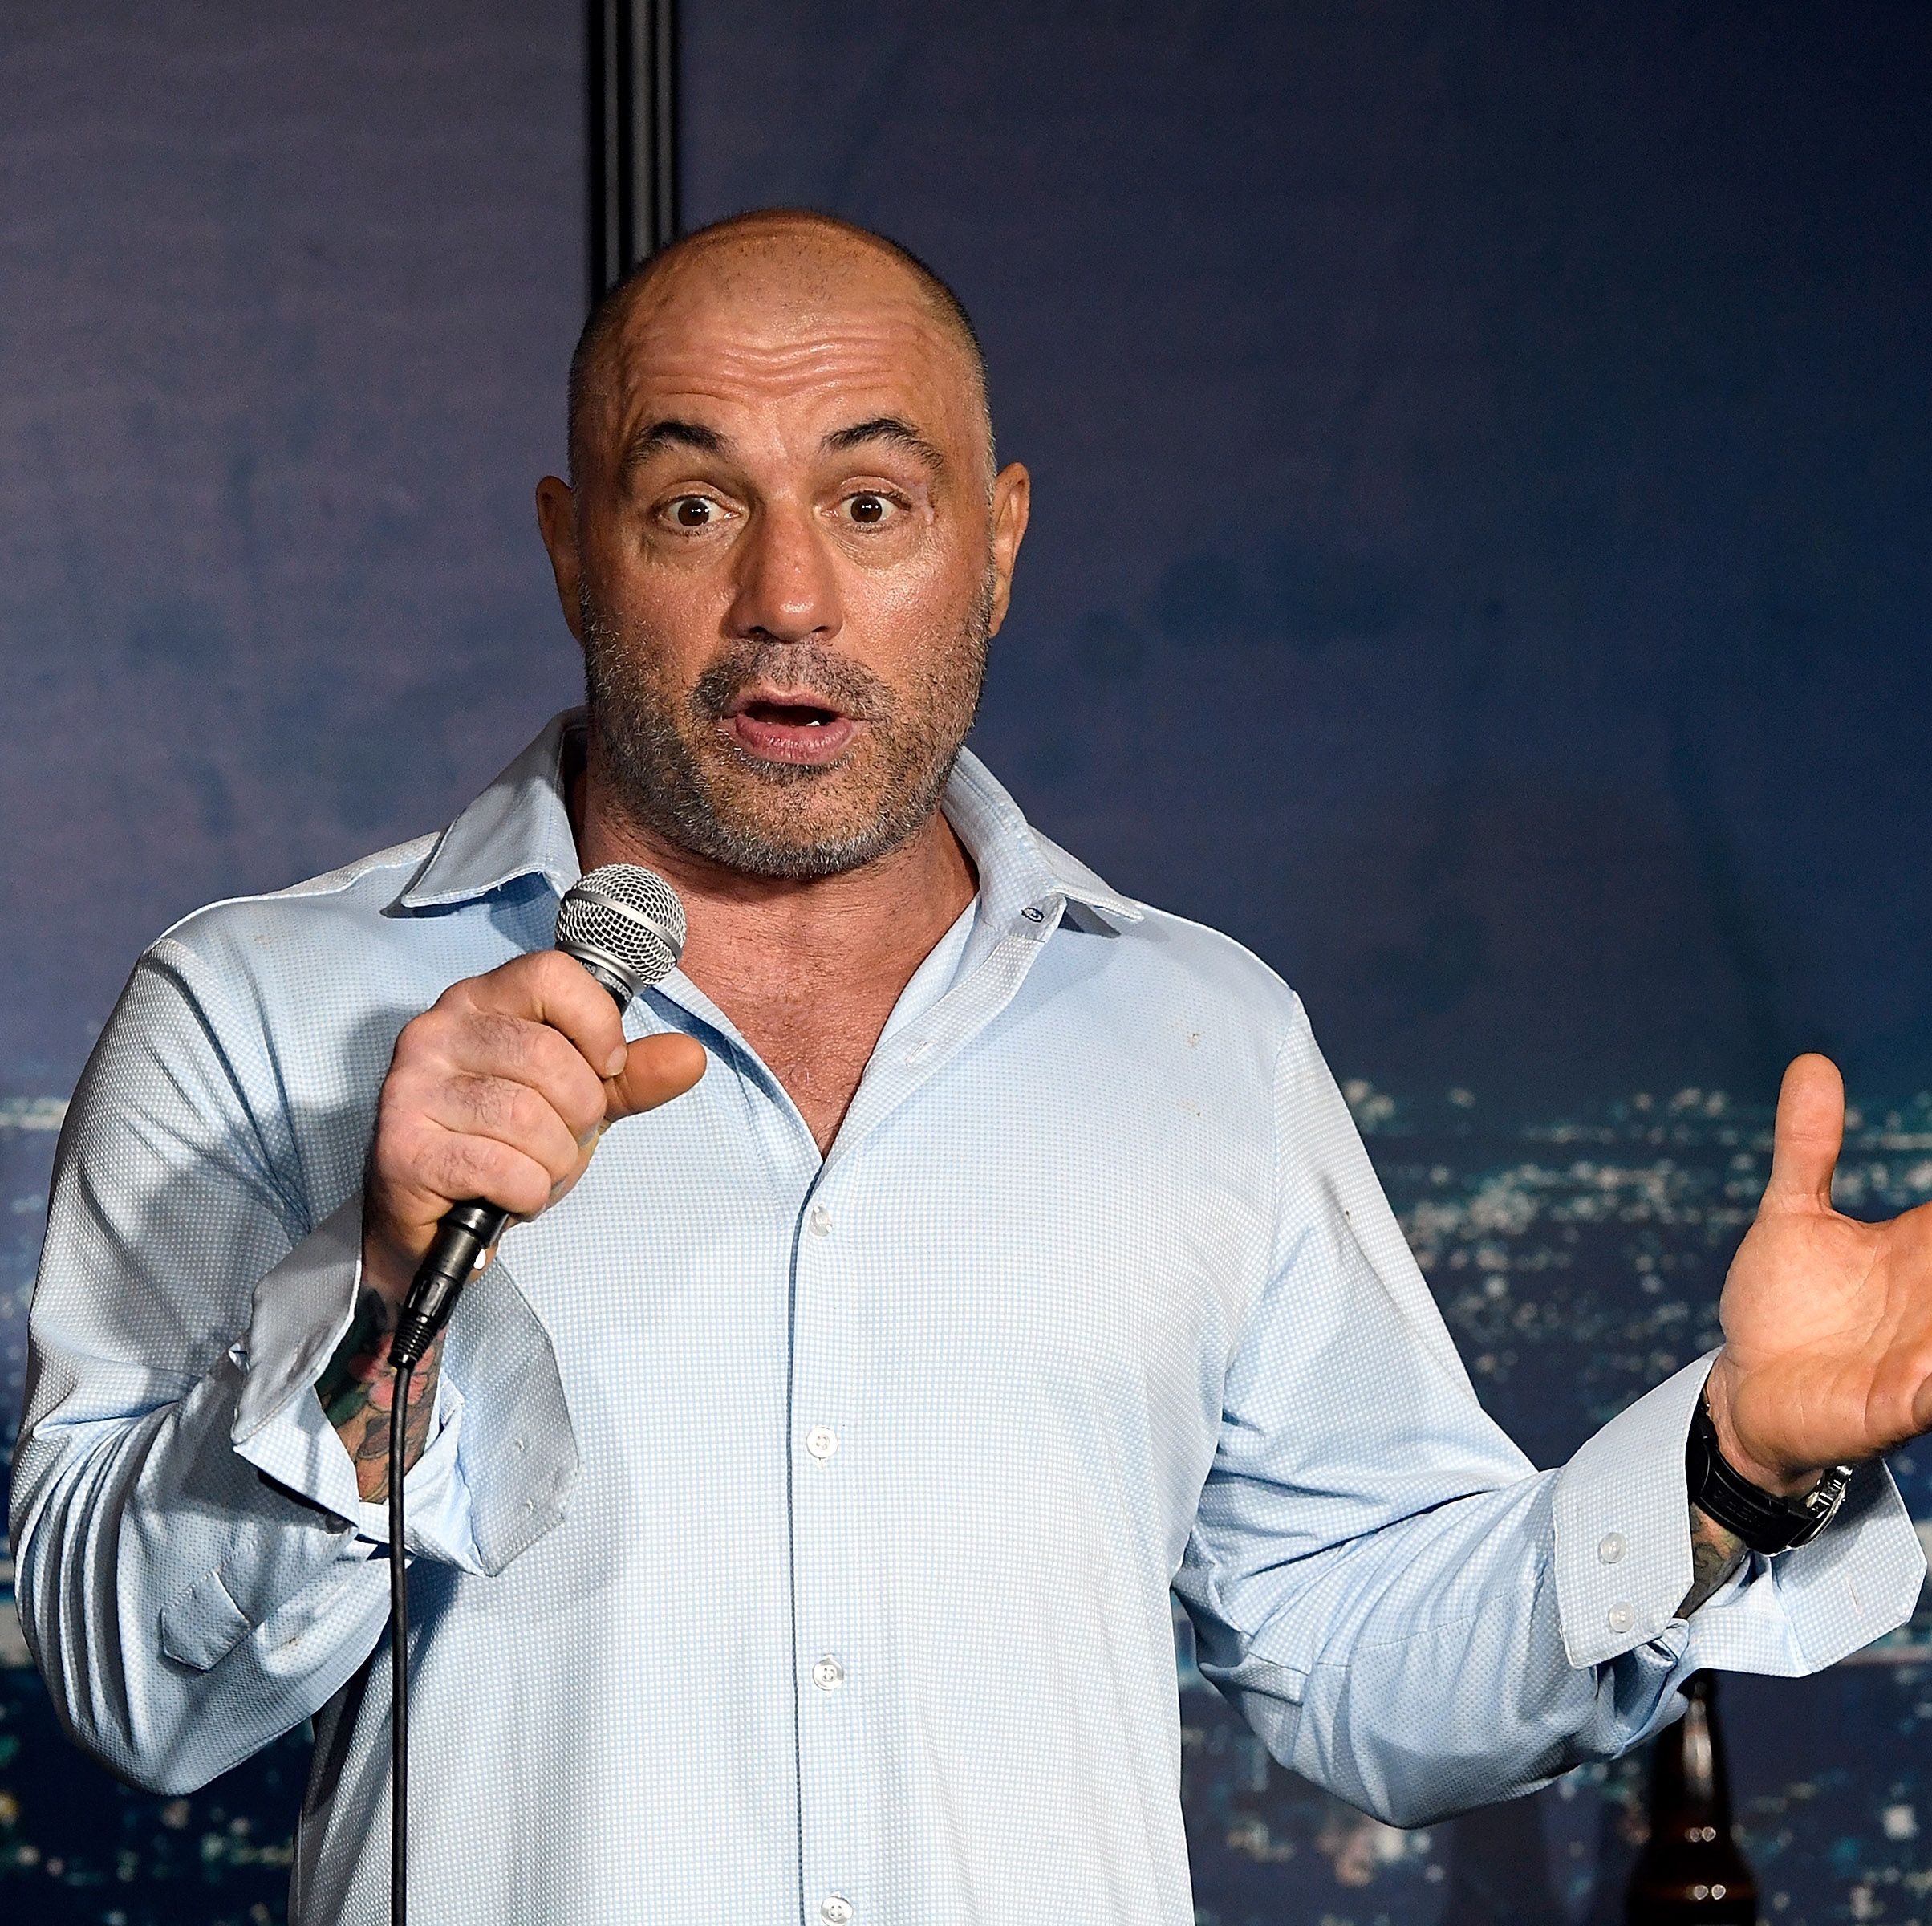 Joe Rogan Insists (!) That He's Just Trying to Talk to People